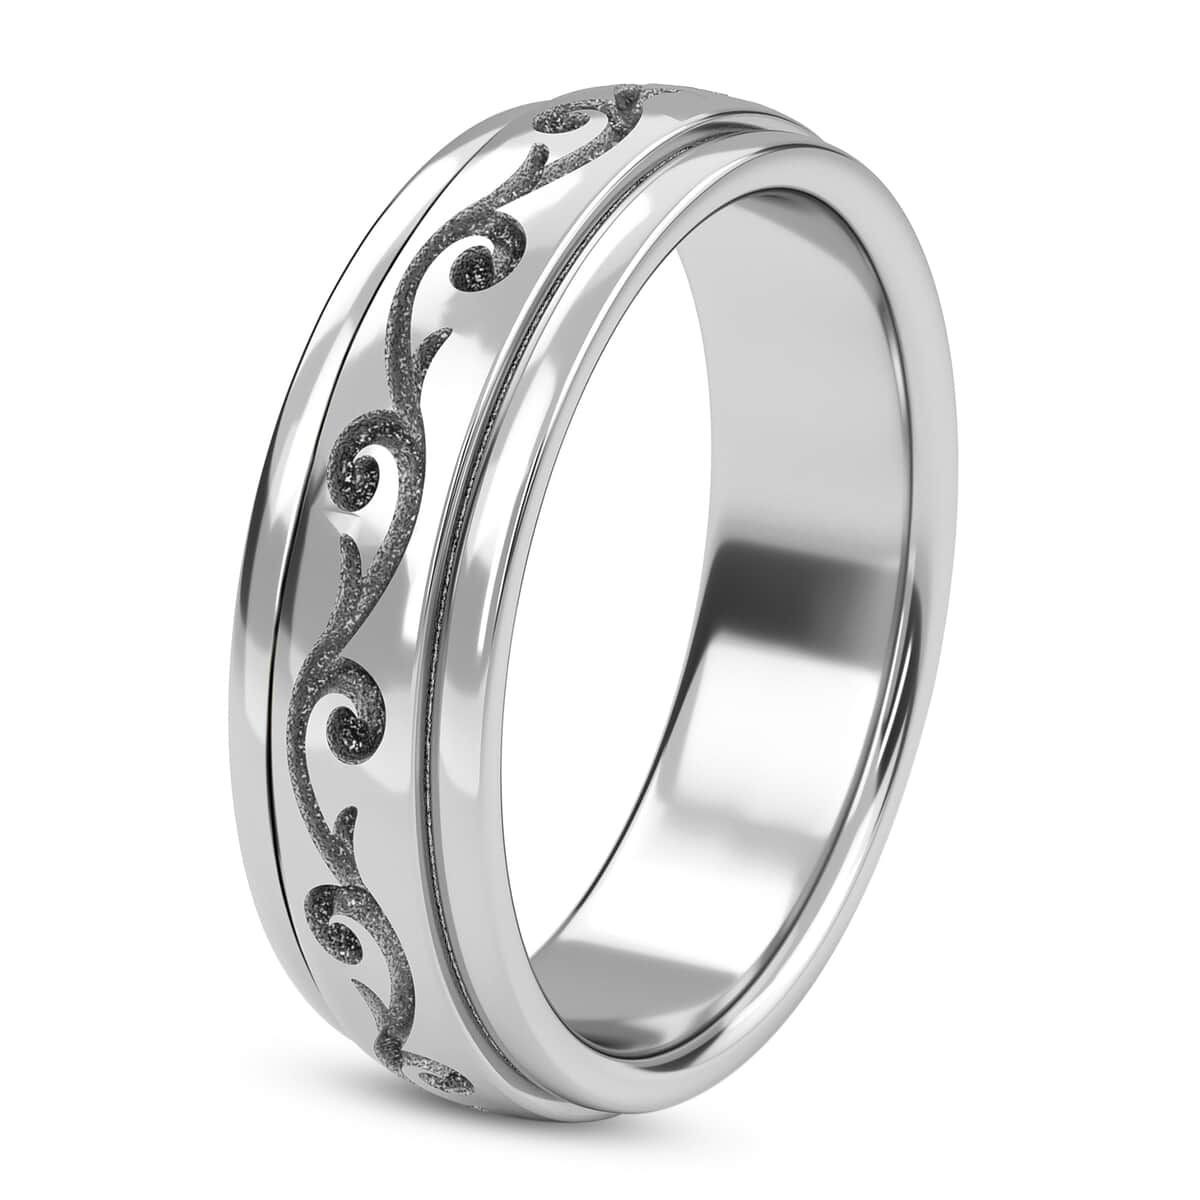 Vines Sterling Silver Spinner Ring, Anxiety Ring for Women, Fidget Rings for Anxiety, Stress Relieving Anxiety Ring image number 6